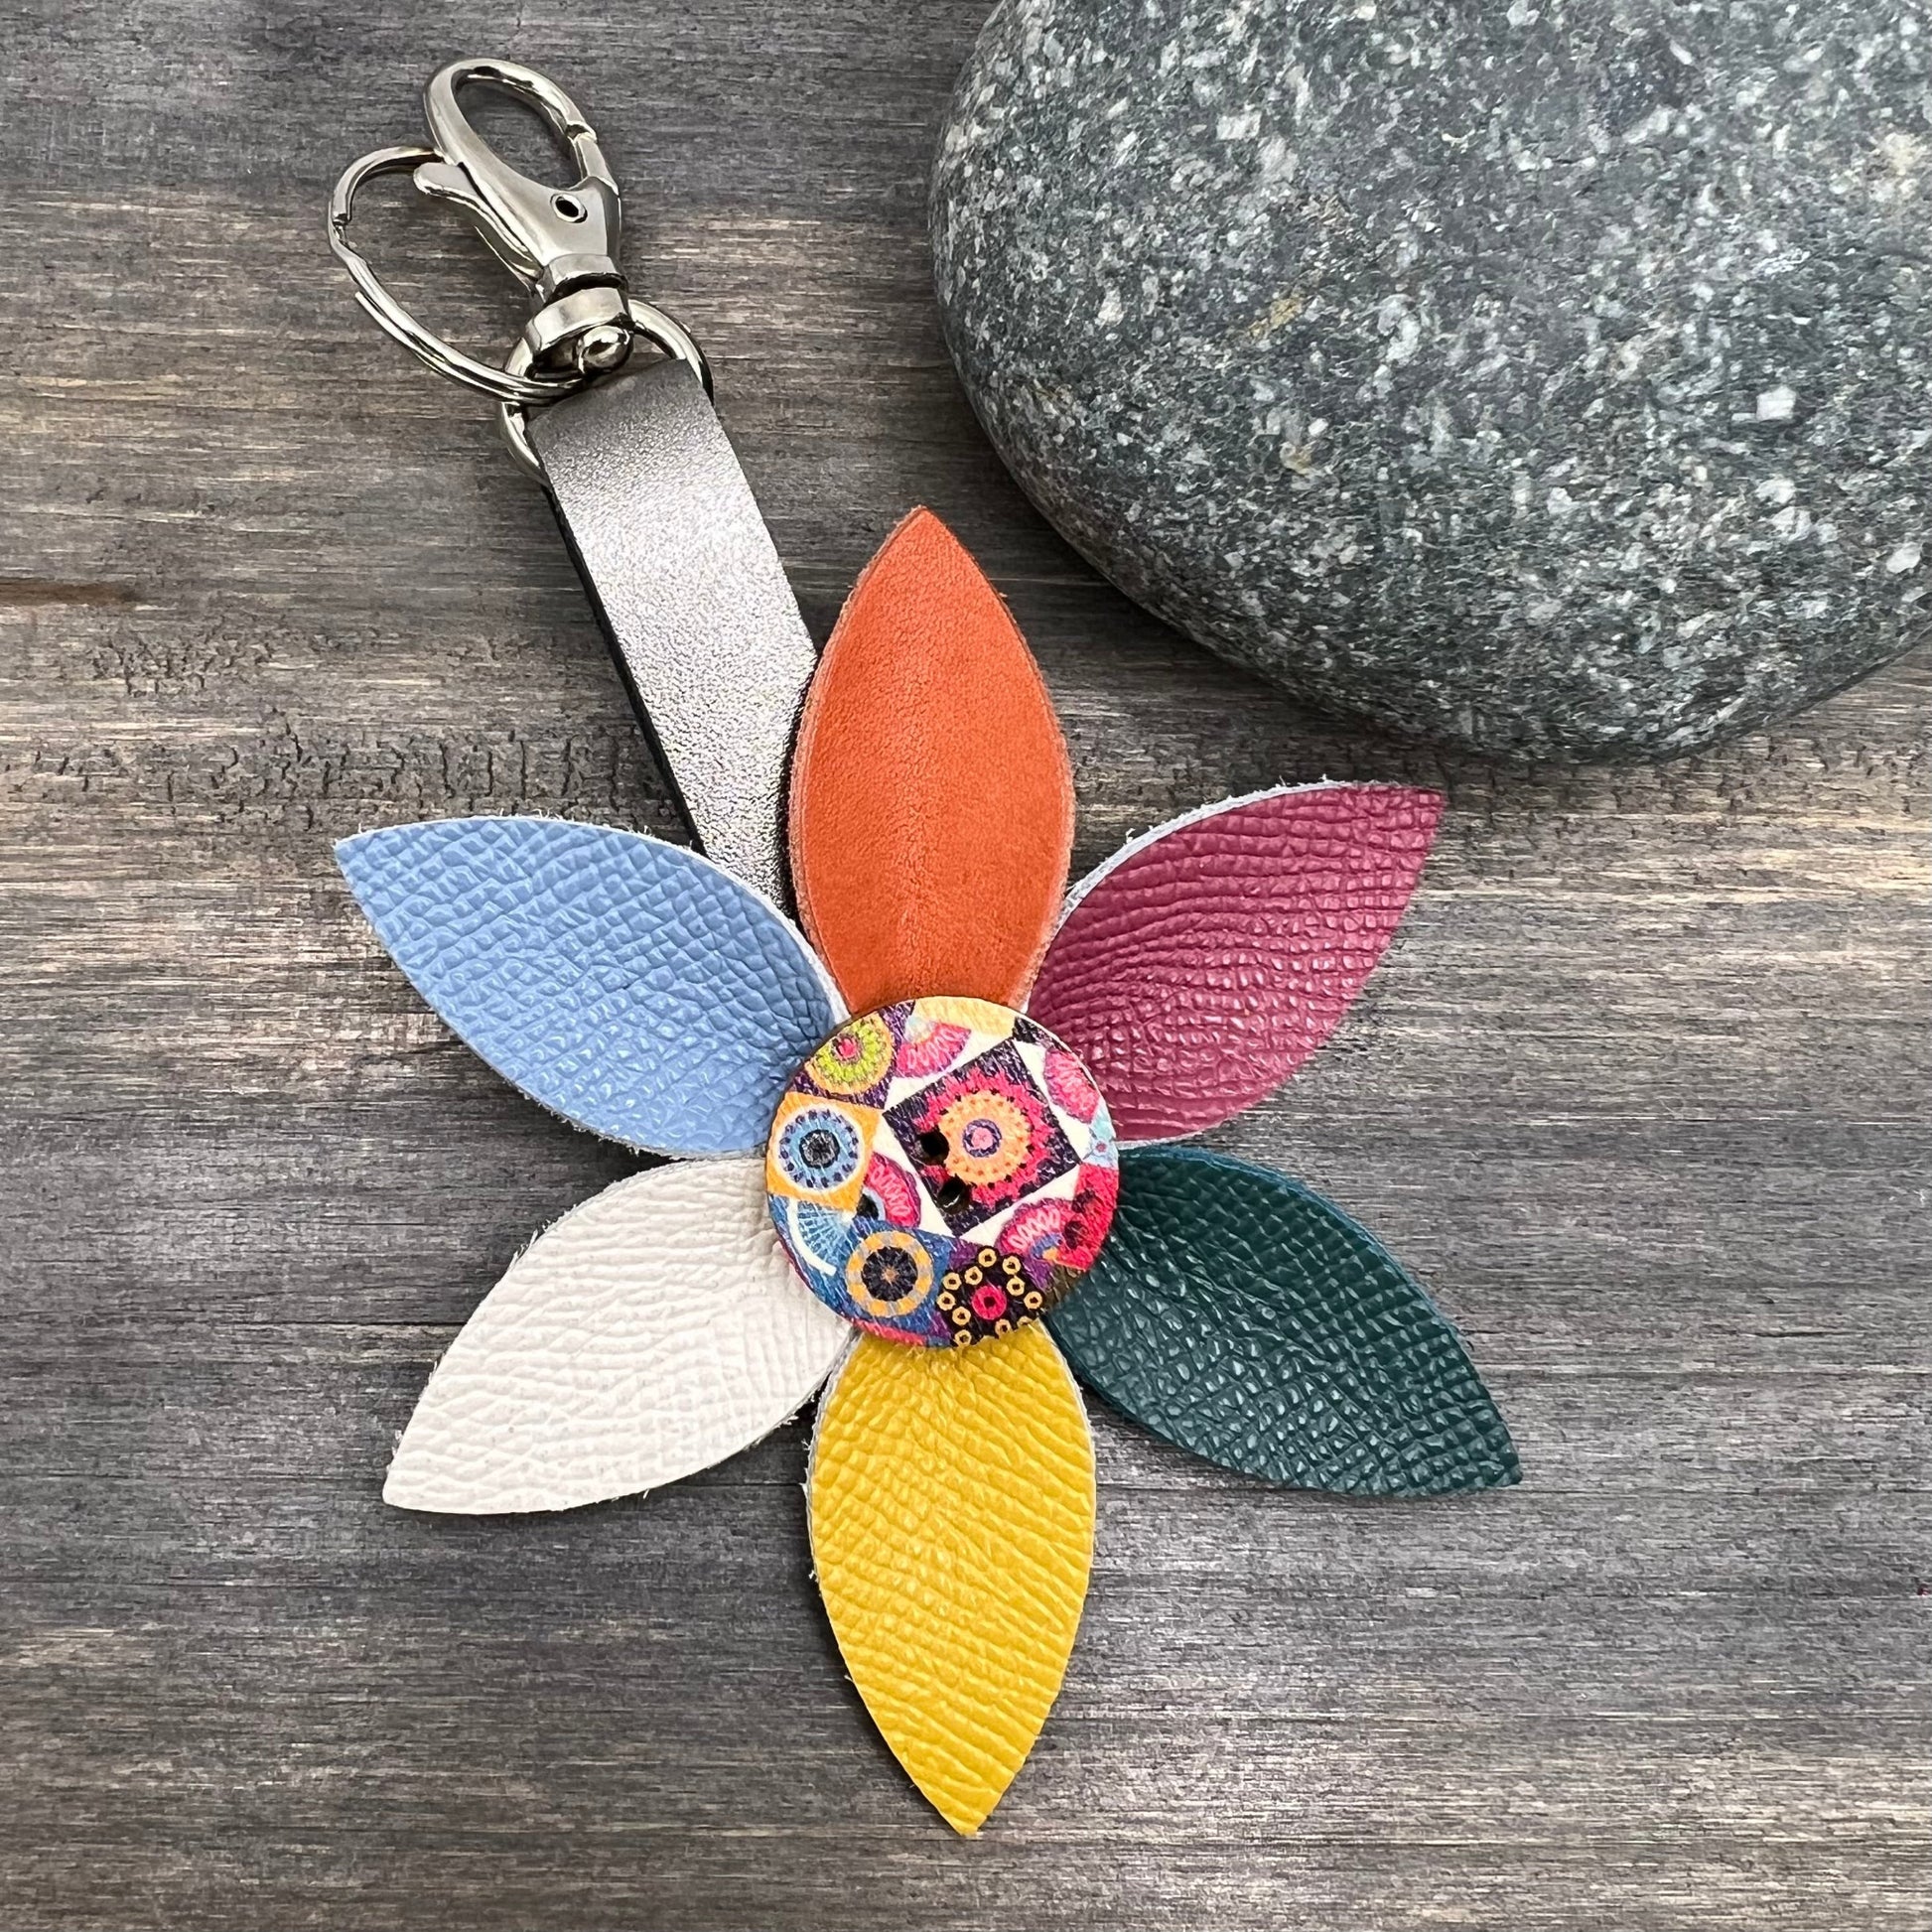 lindsaystreemdesigns Leather Purse Charms - Colorful Flowers Bright Blue